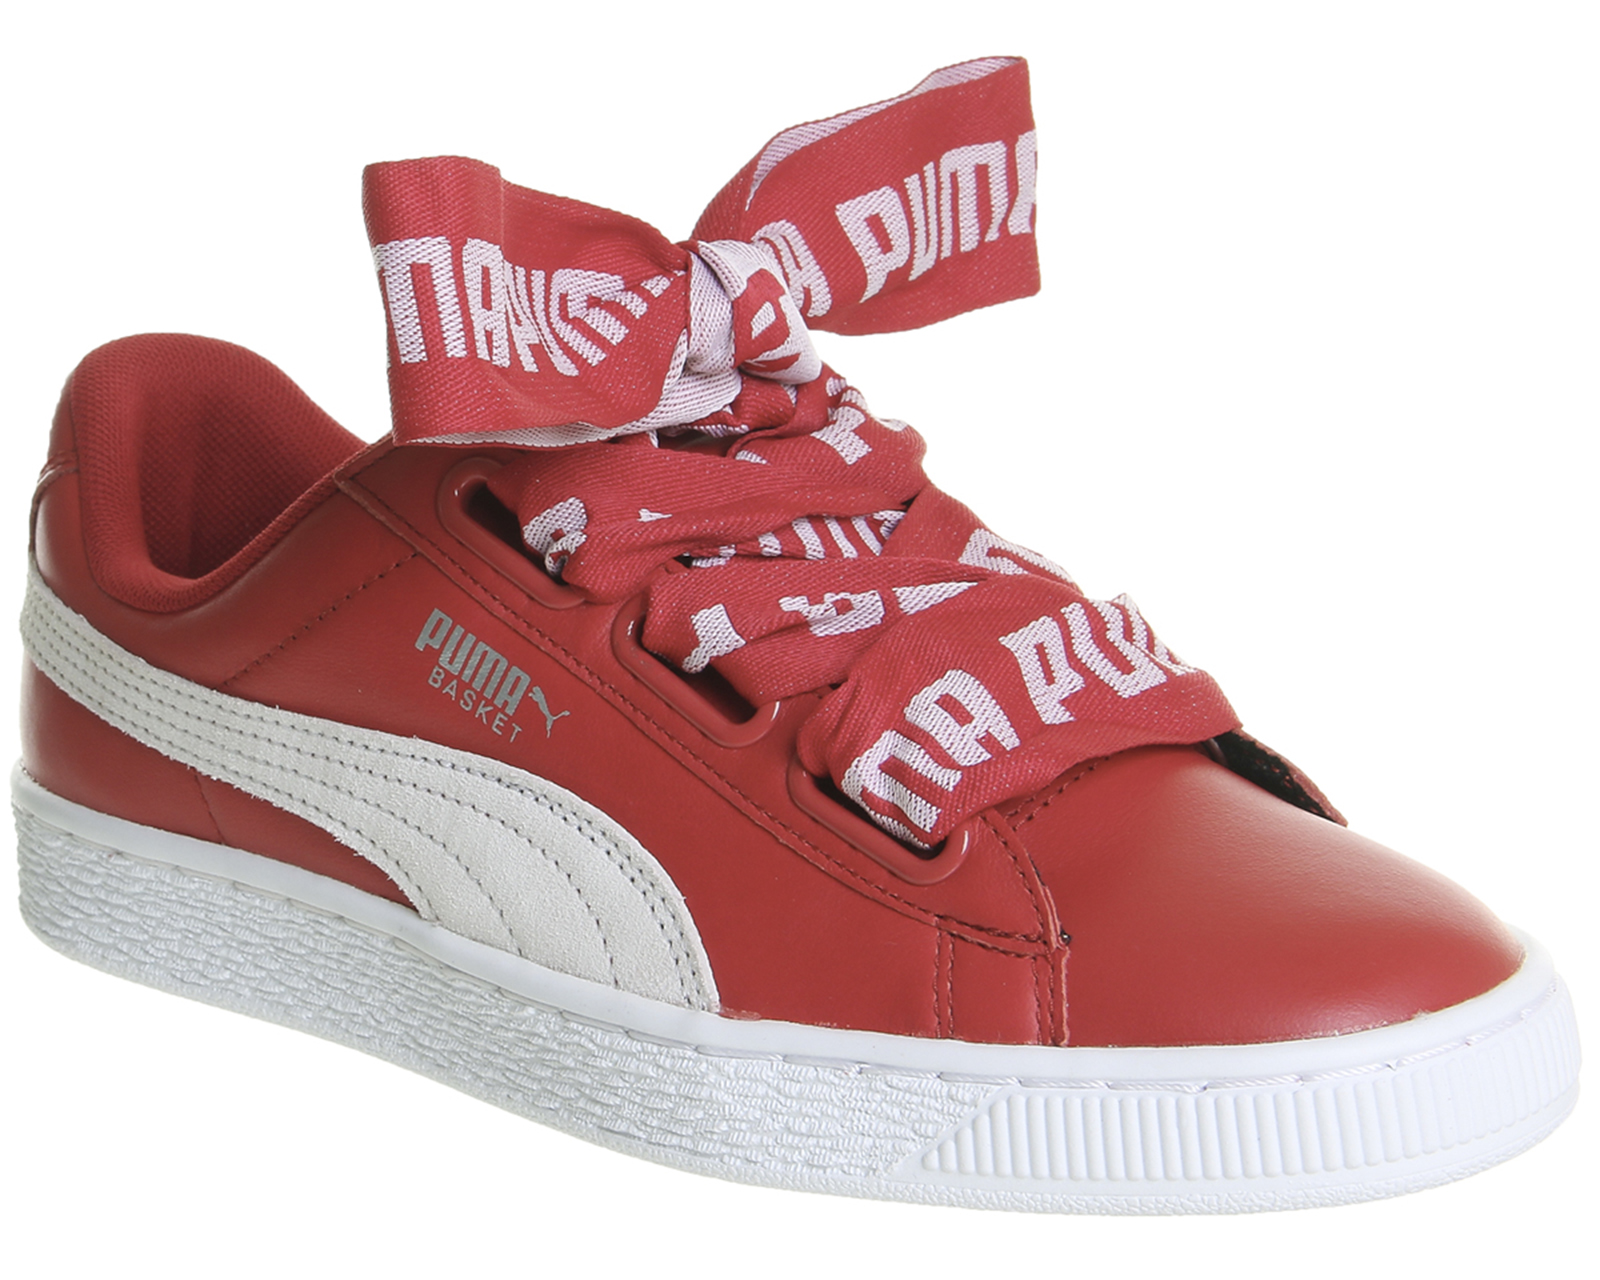 Puma Basket Heart Red - Hers trainers